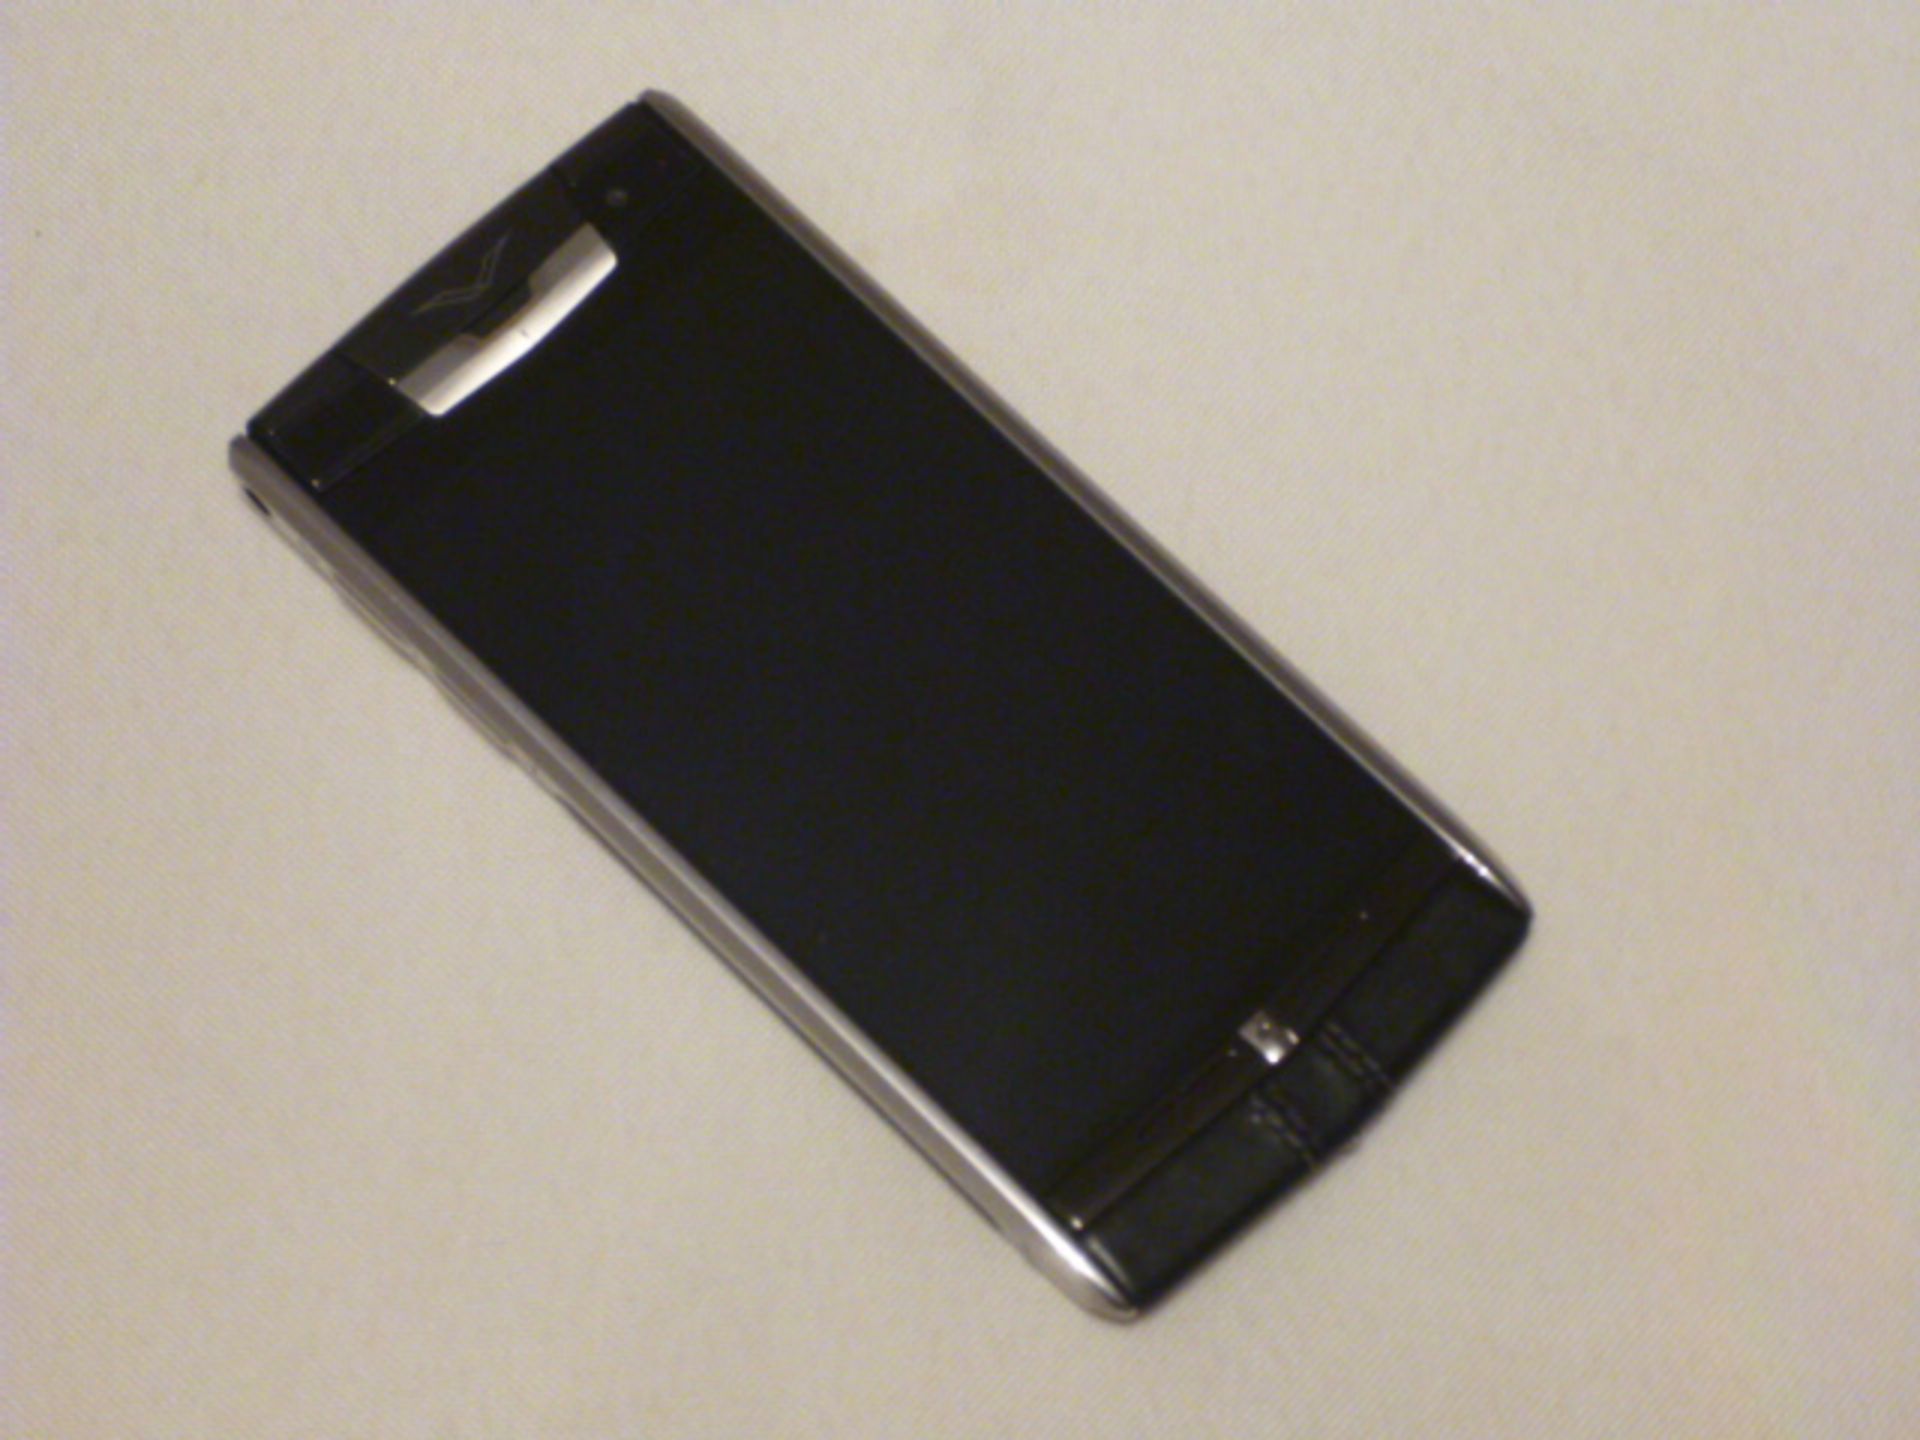 Vertu Signature Touch Jet Calf, Courtesy Phone, S/N E-013126. Tested Working, but without Warranty